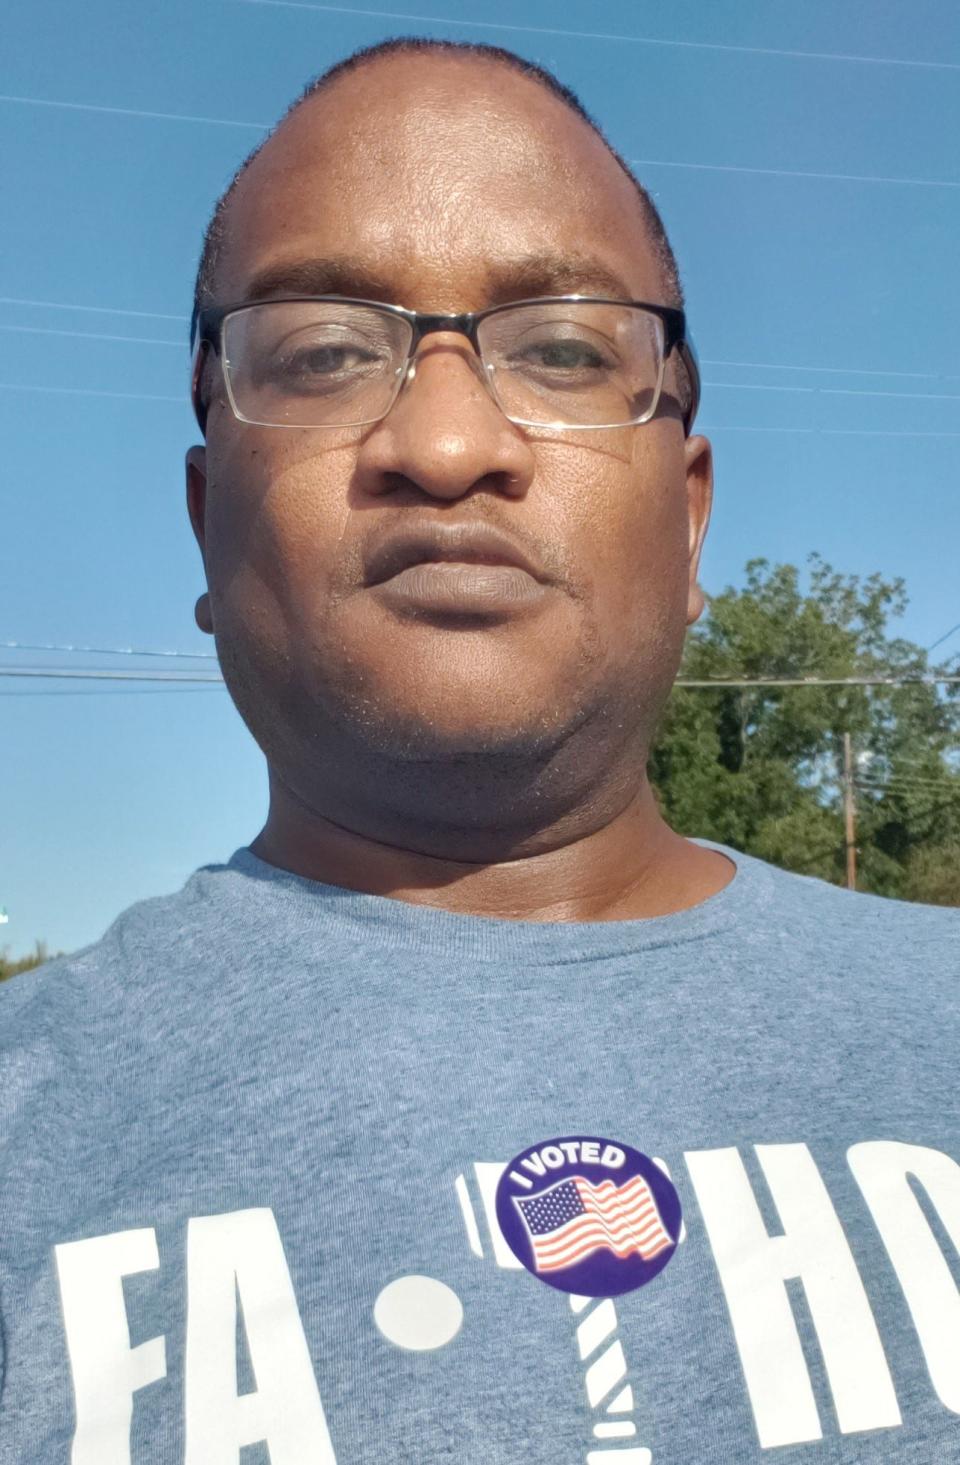 Myron Pitts shows off his I Voted sticker after voting in the primary election for Fayetteville City Council on Tuesday, Oct. 10, 2023.